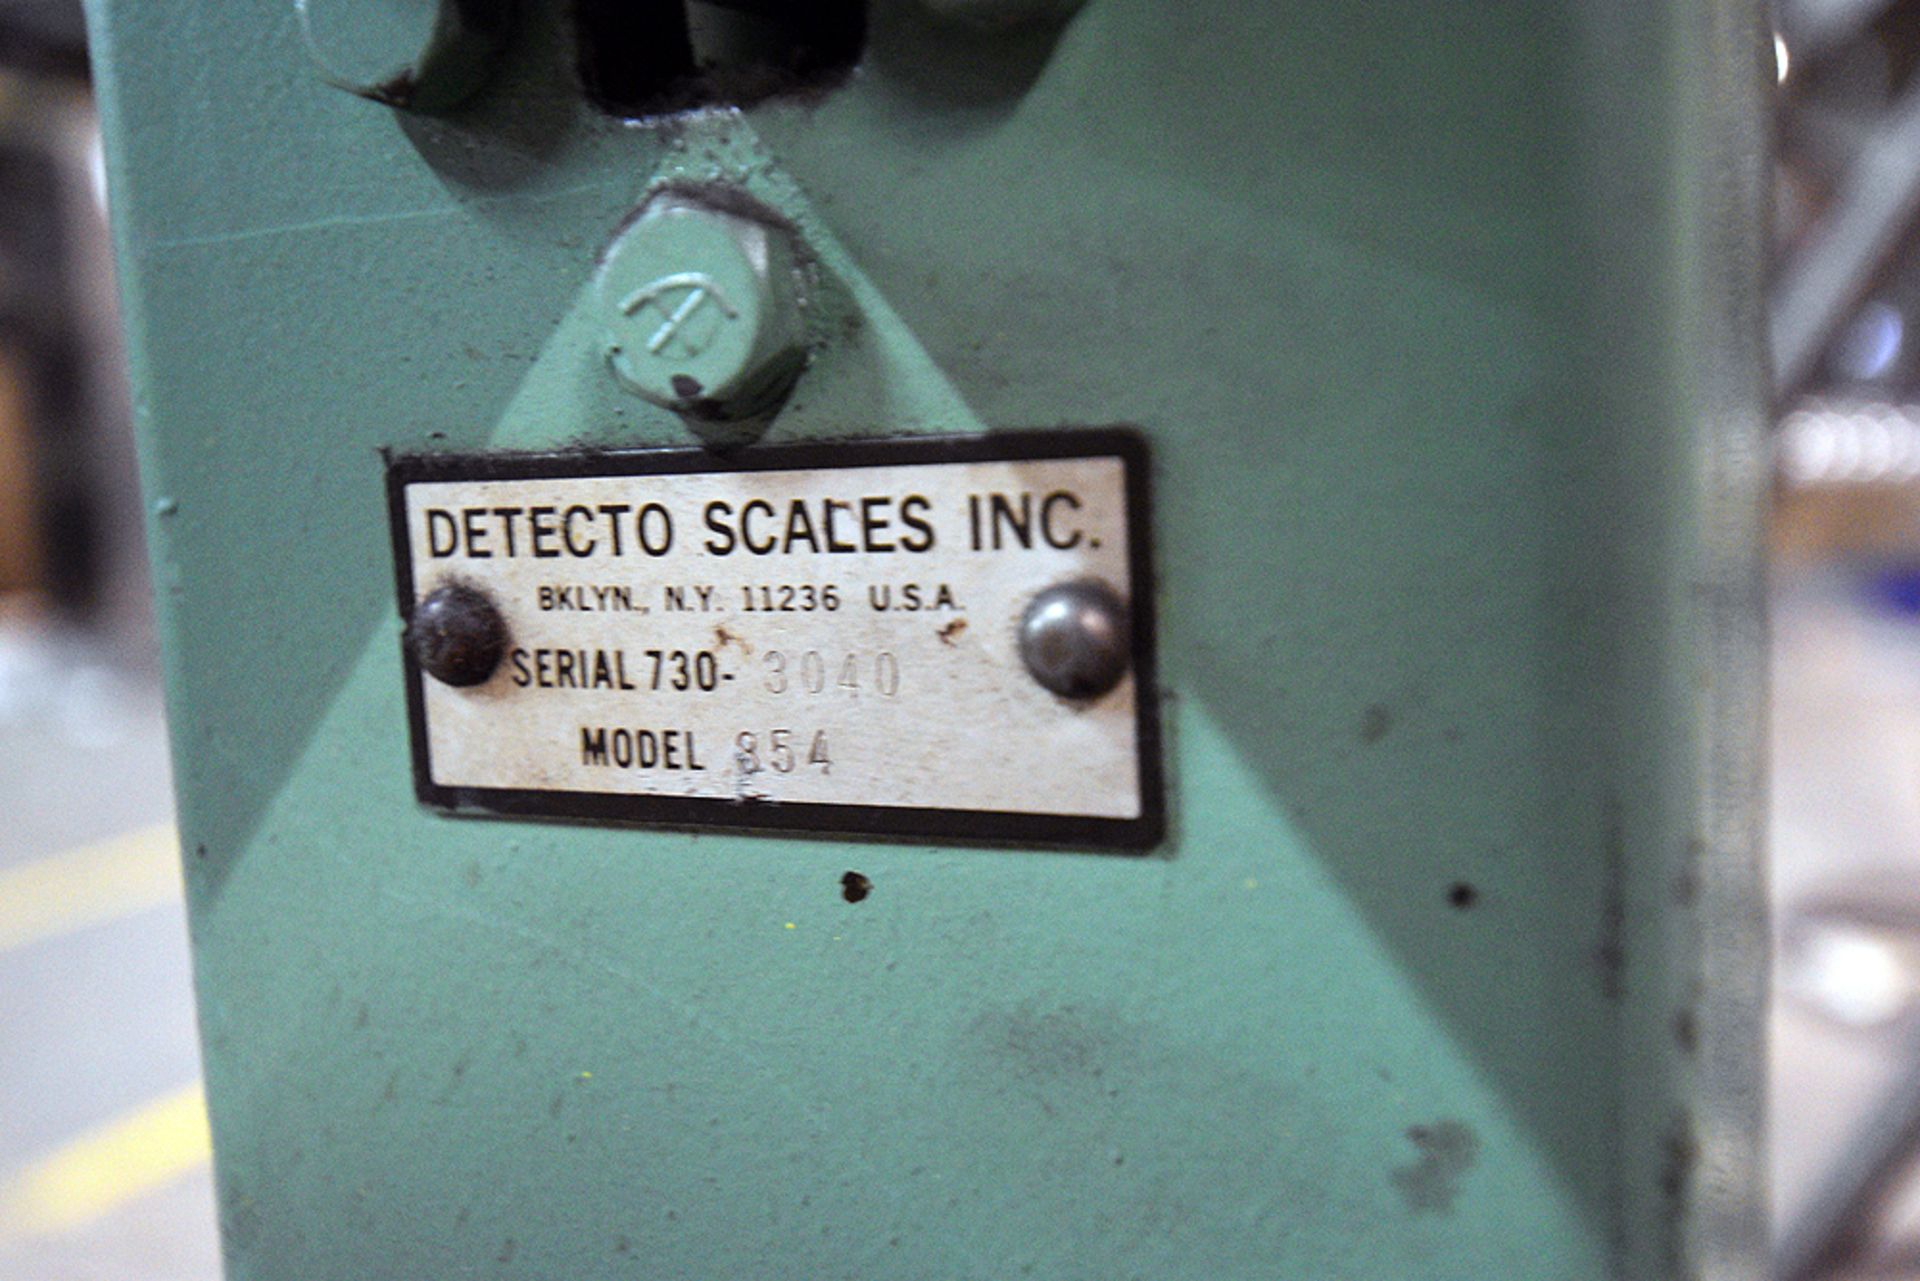 Detecto Rolling Scale mod 854 - Image 3 of 3